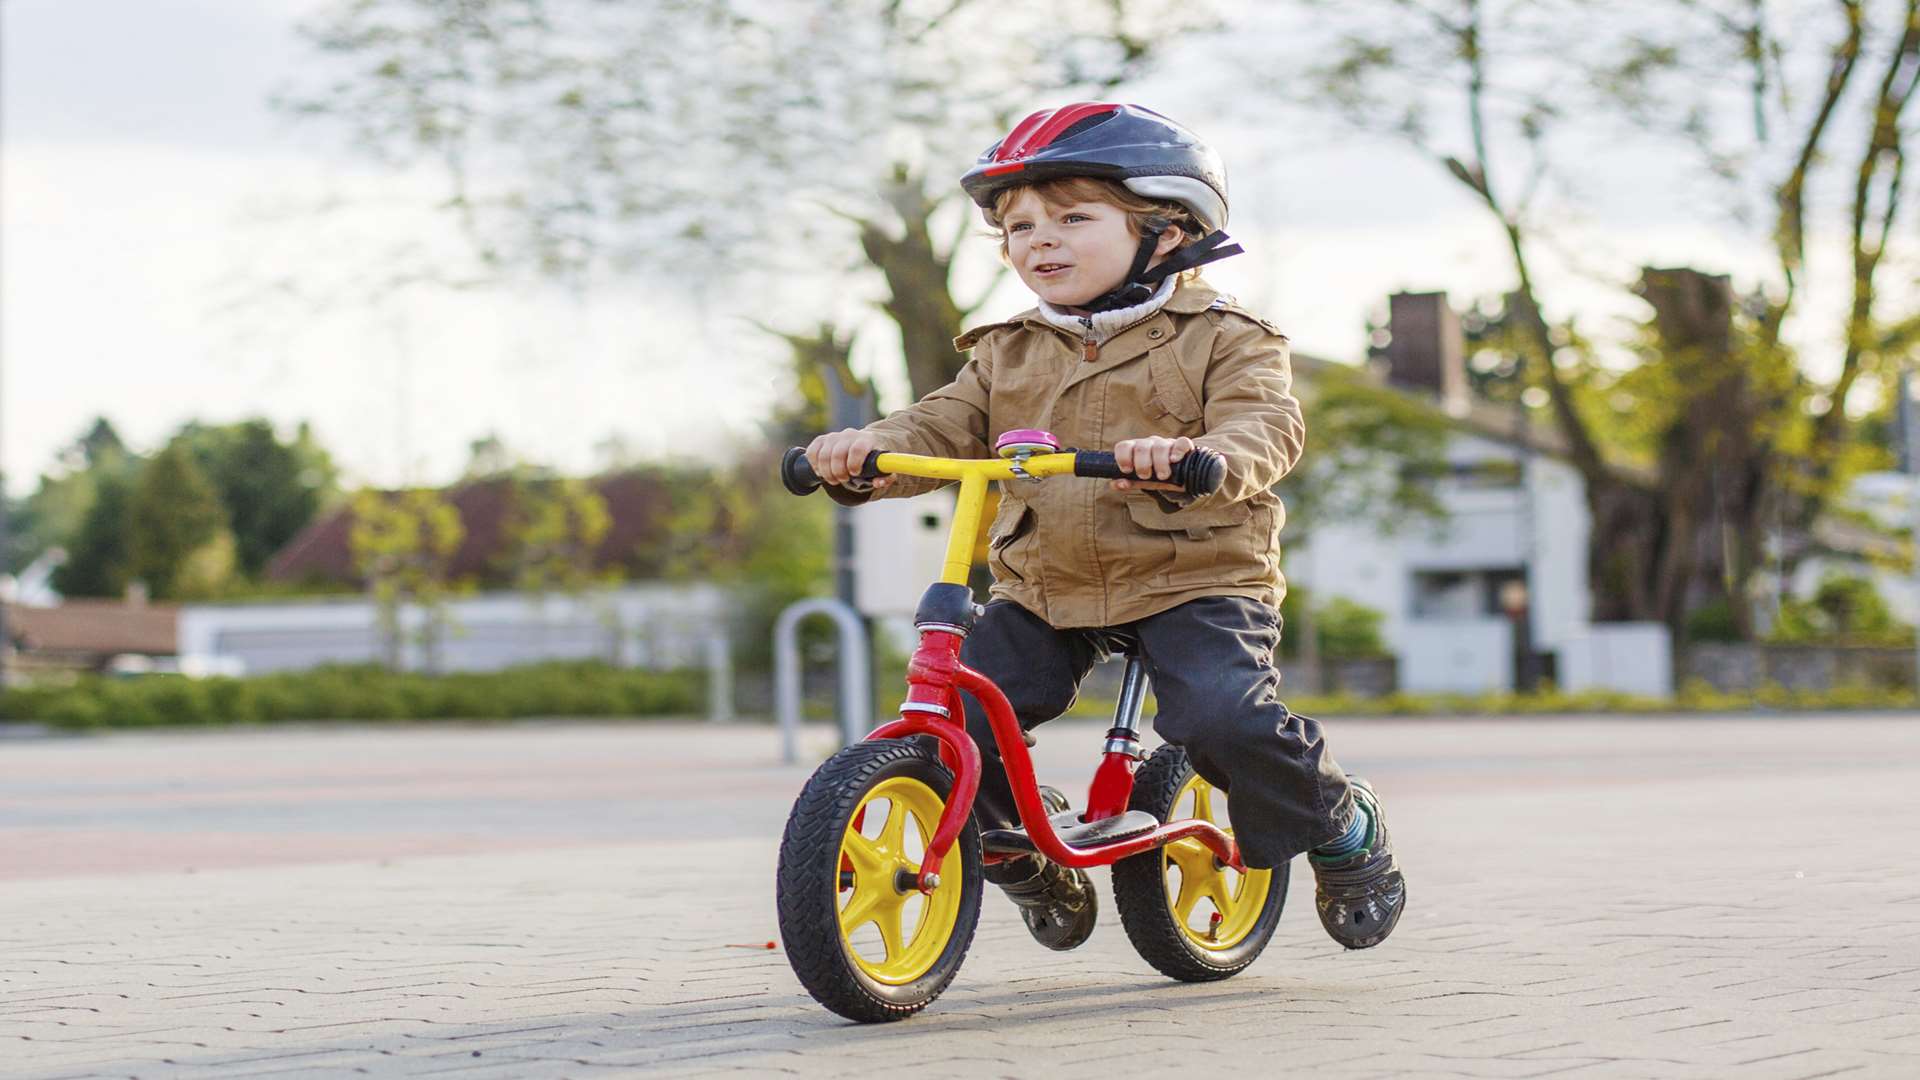 Get your youngster started on a balance bike